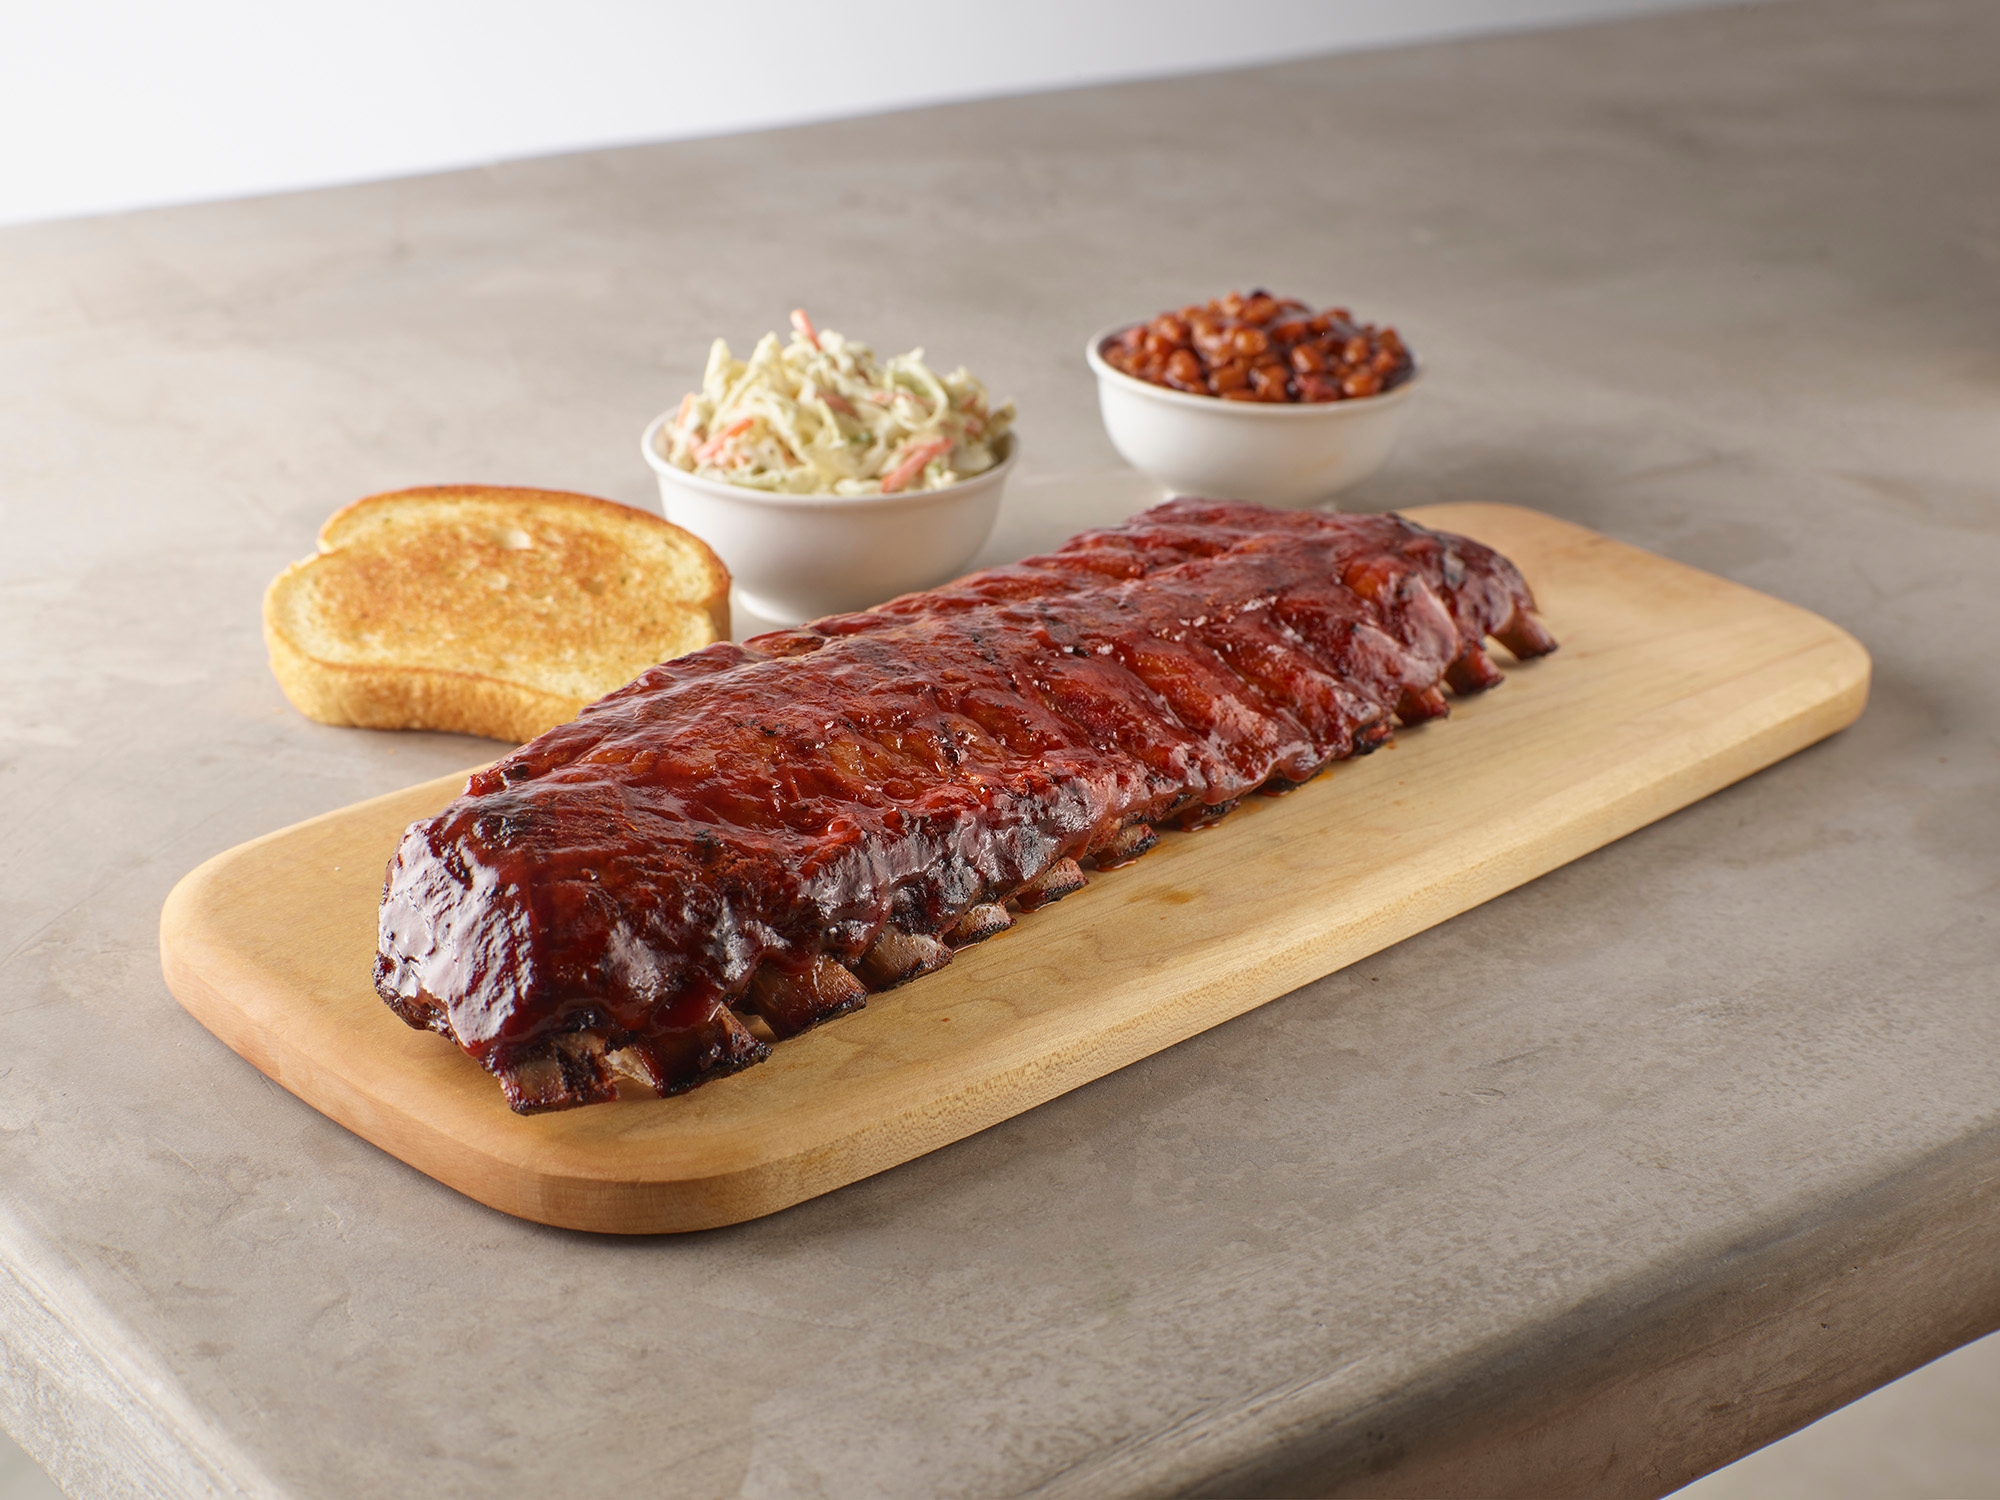 A larger-than-life rack of juicy ribs, served with garlic bread, coleslaw, and BBQ baked beans.